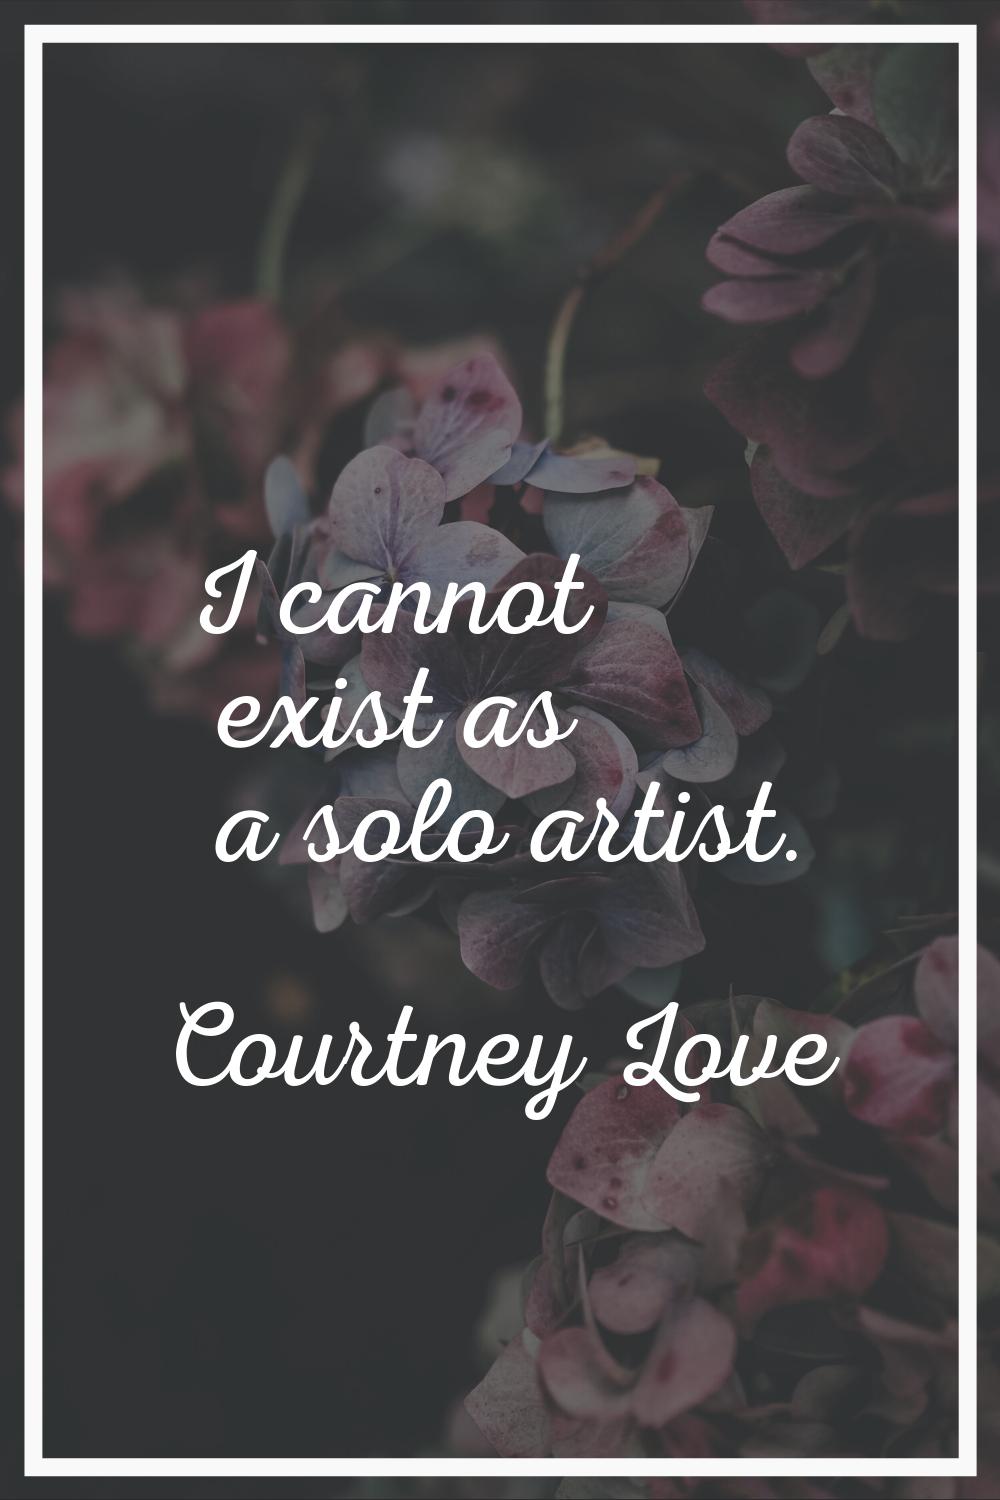 I cannot exist as a solo artist.